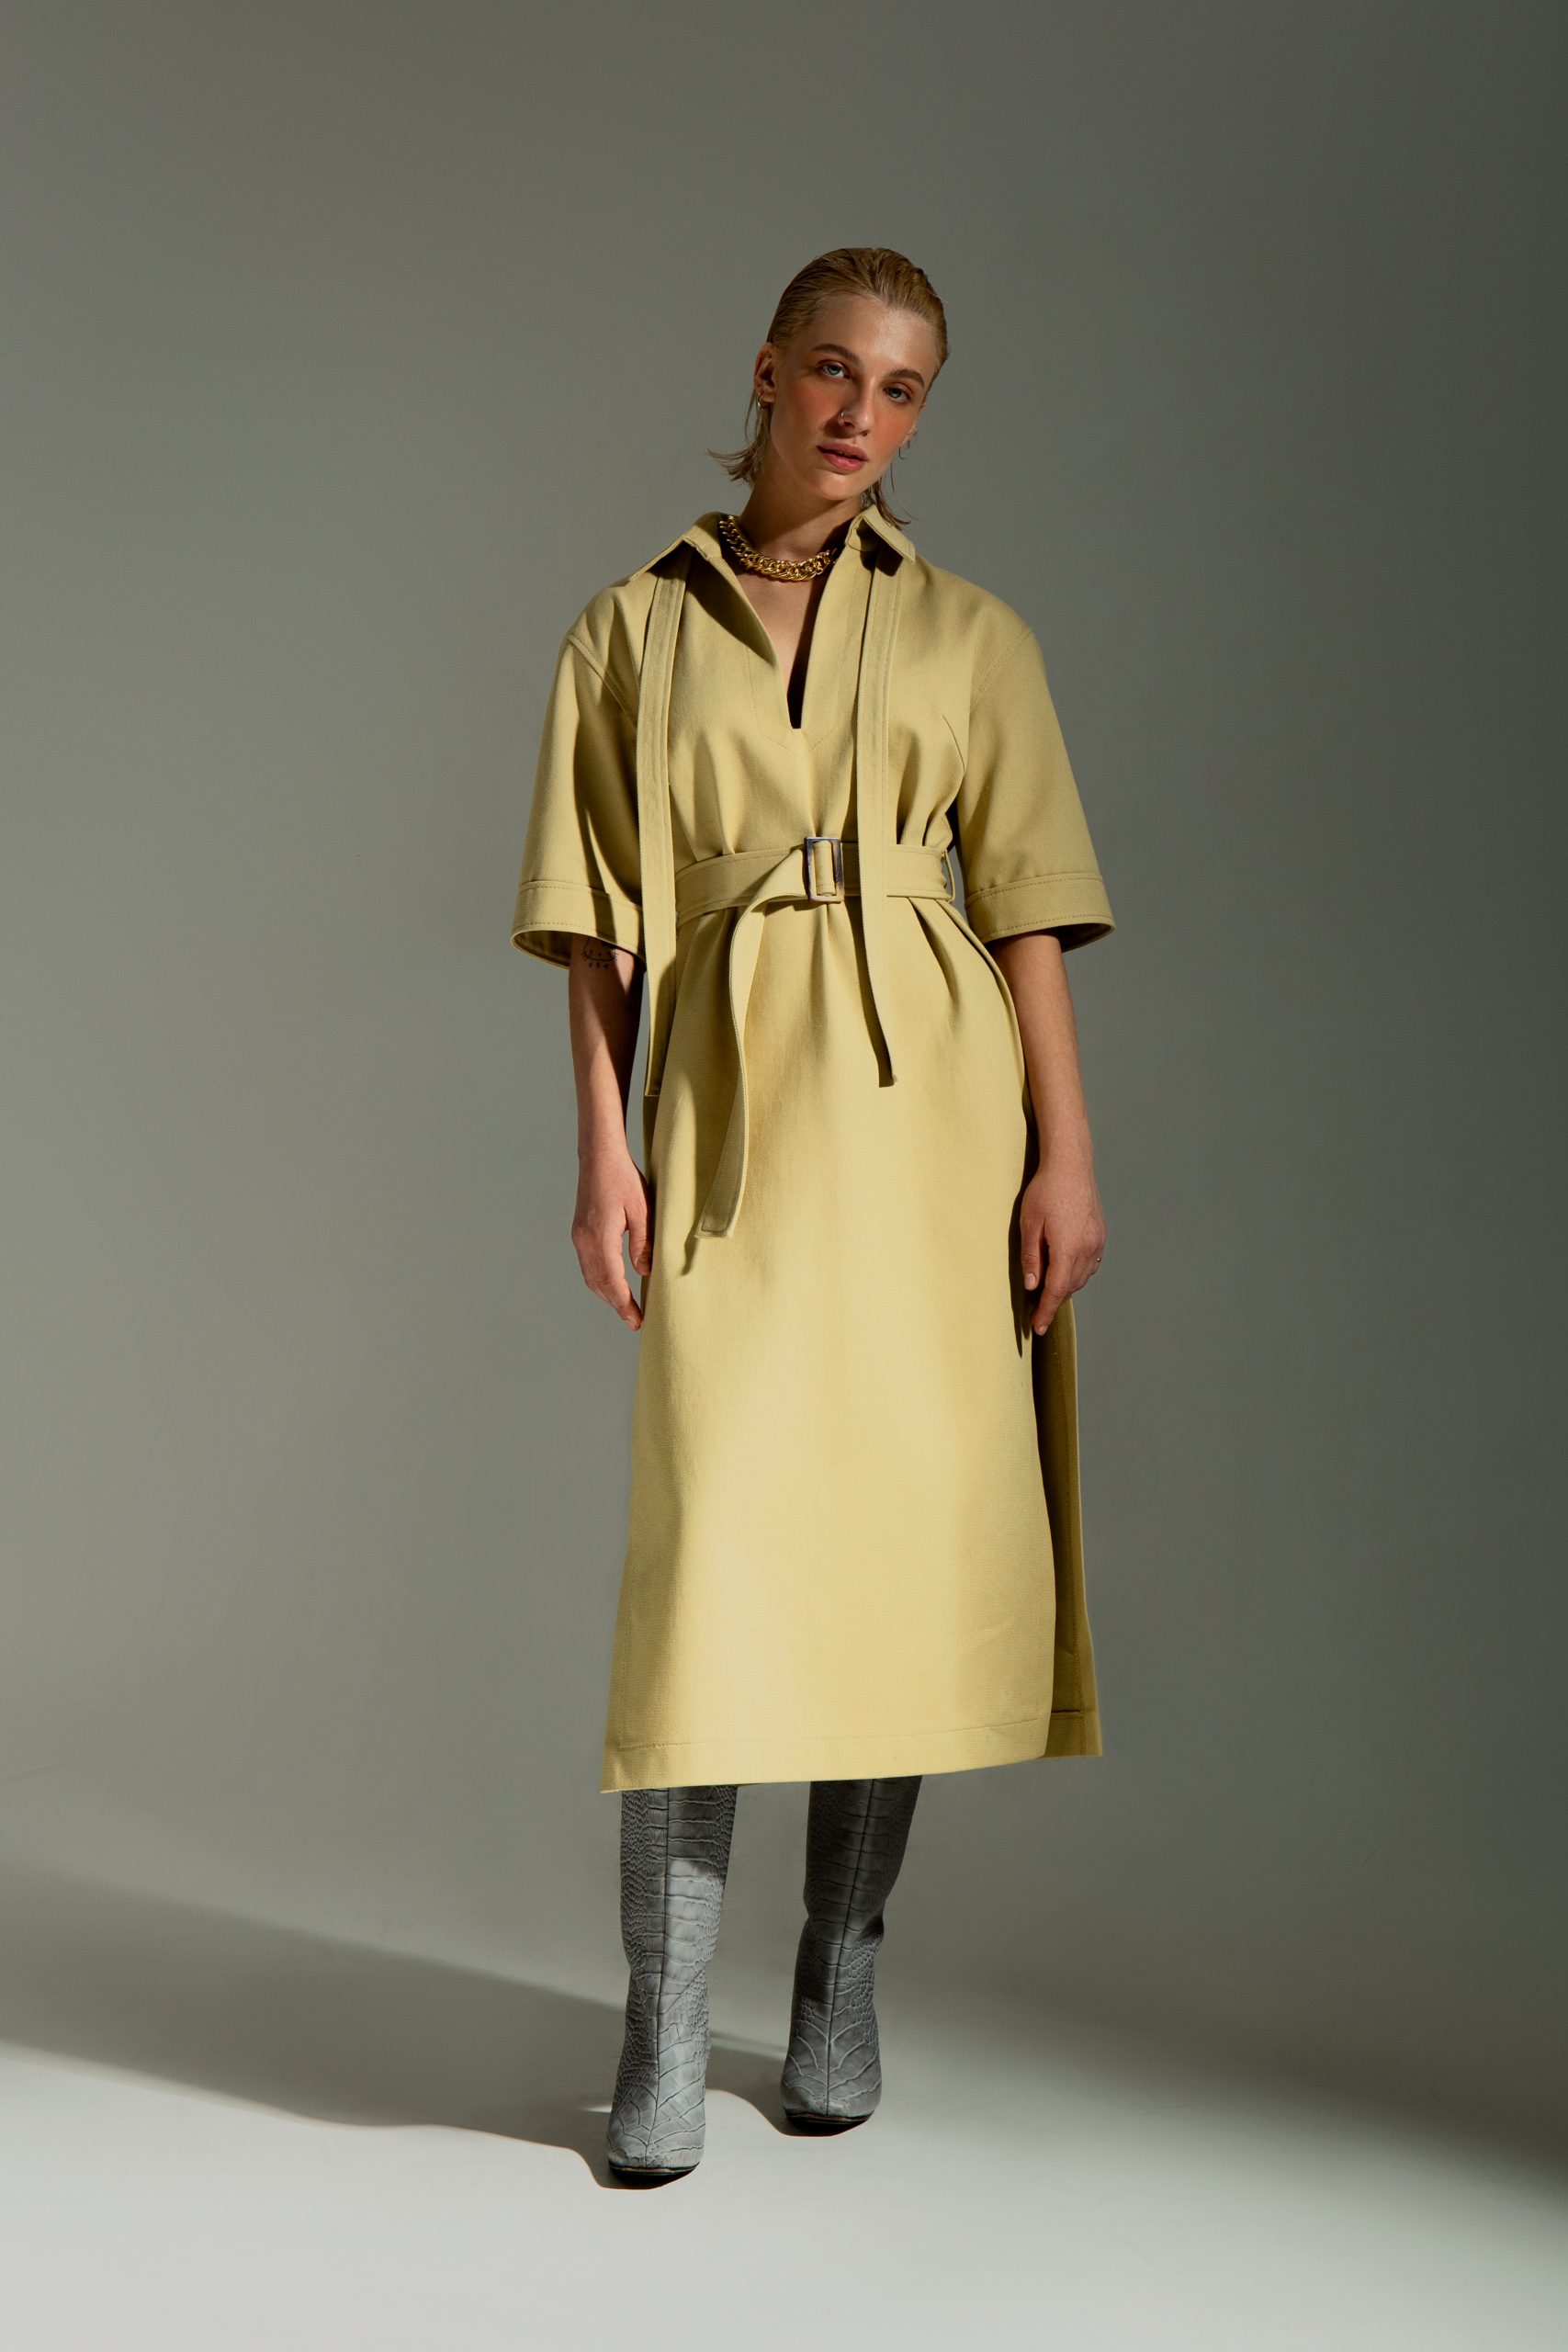 Woman wearing the Helen Dress sewing pattern from Vikisews on The Fold Line. A dress pattern made in wool, gabardine, denim, fine wale corduroy, corduroy, faux leather or suede fabrics, featuring a relaxed fit with straight silhouette, detachable belt with buckle fastener, bust darts, back yoke with pleat, collar and stand, decorative collar tie, centre front deep V slit, semi-fitted elbow length sleeves with cuffs, high hemline slits and midi length.